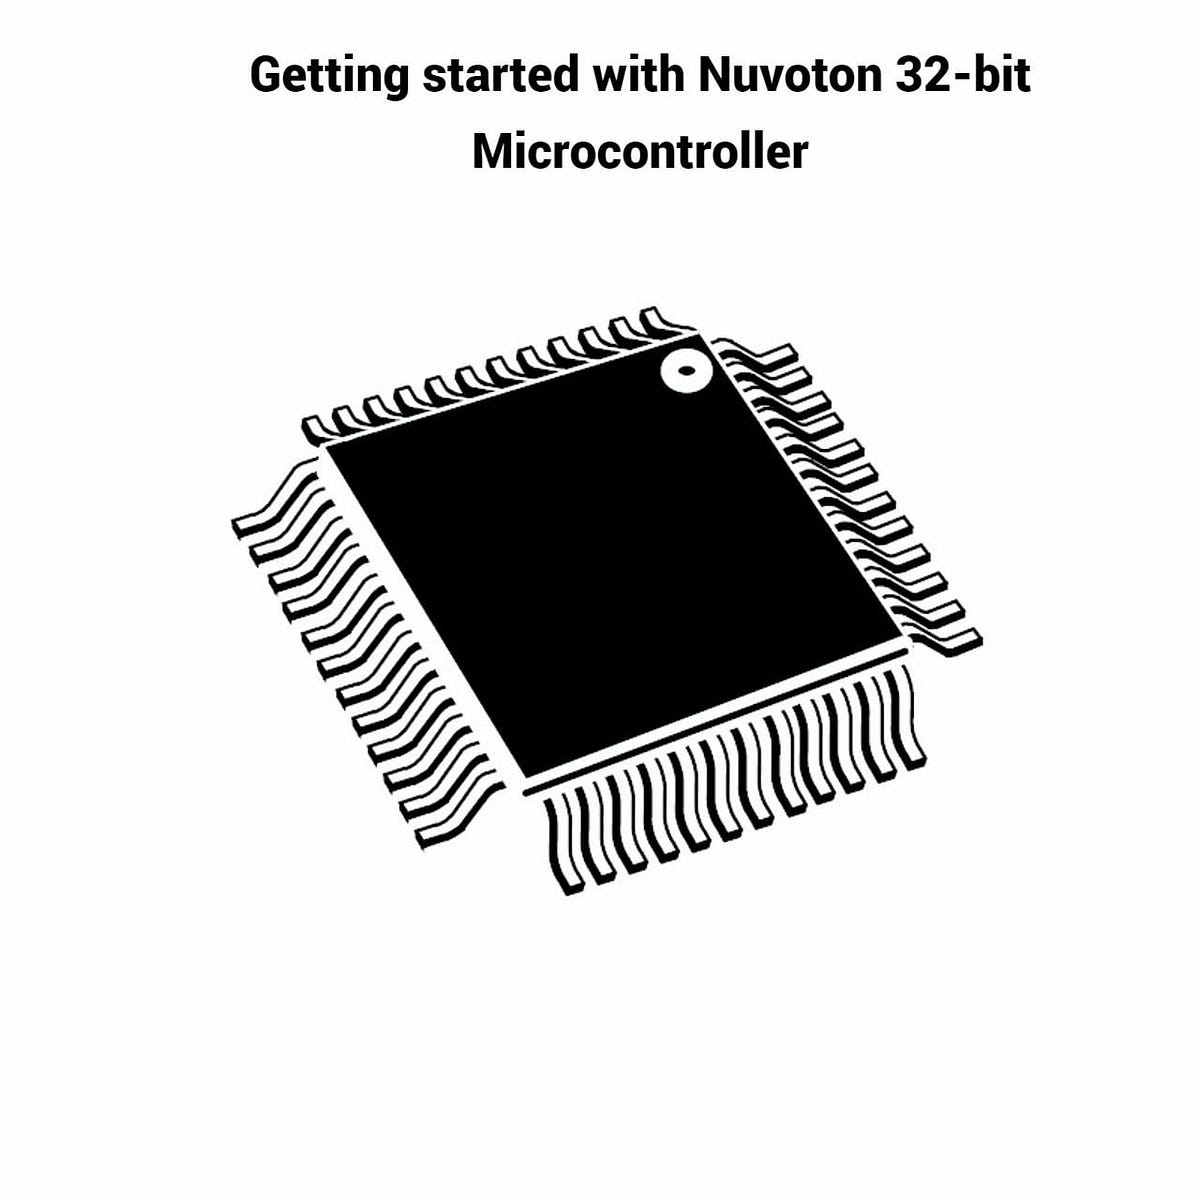 Getting Started with Nuvoton 32-Bit Microcontrollers: A Practical Guide |  by Campus Component Pvt. Ltd | Medium